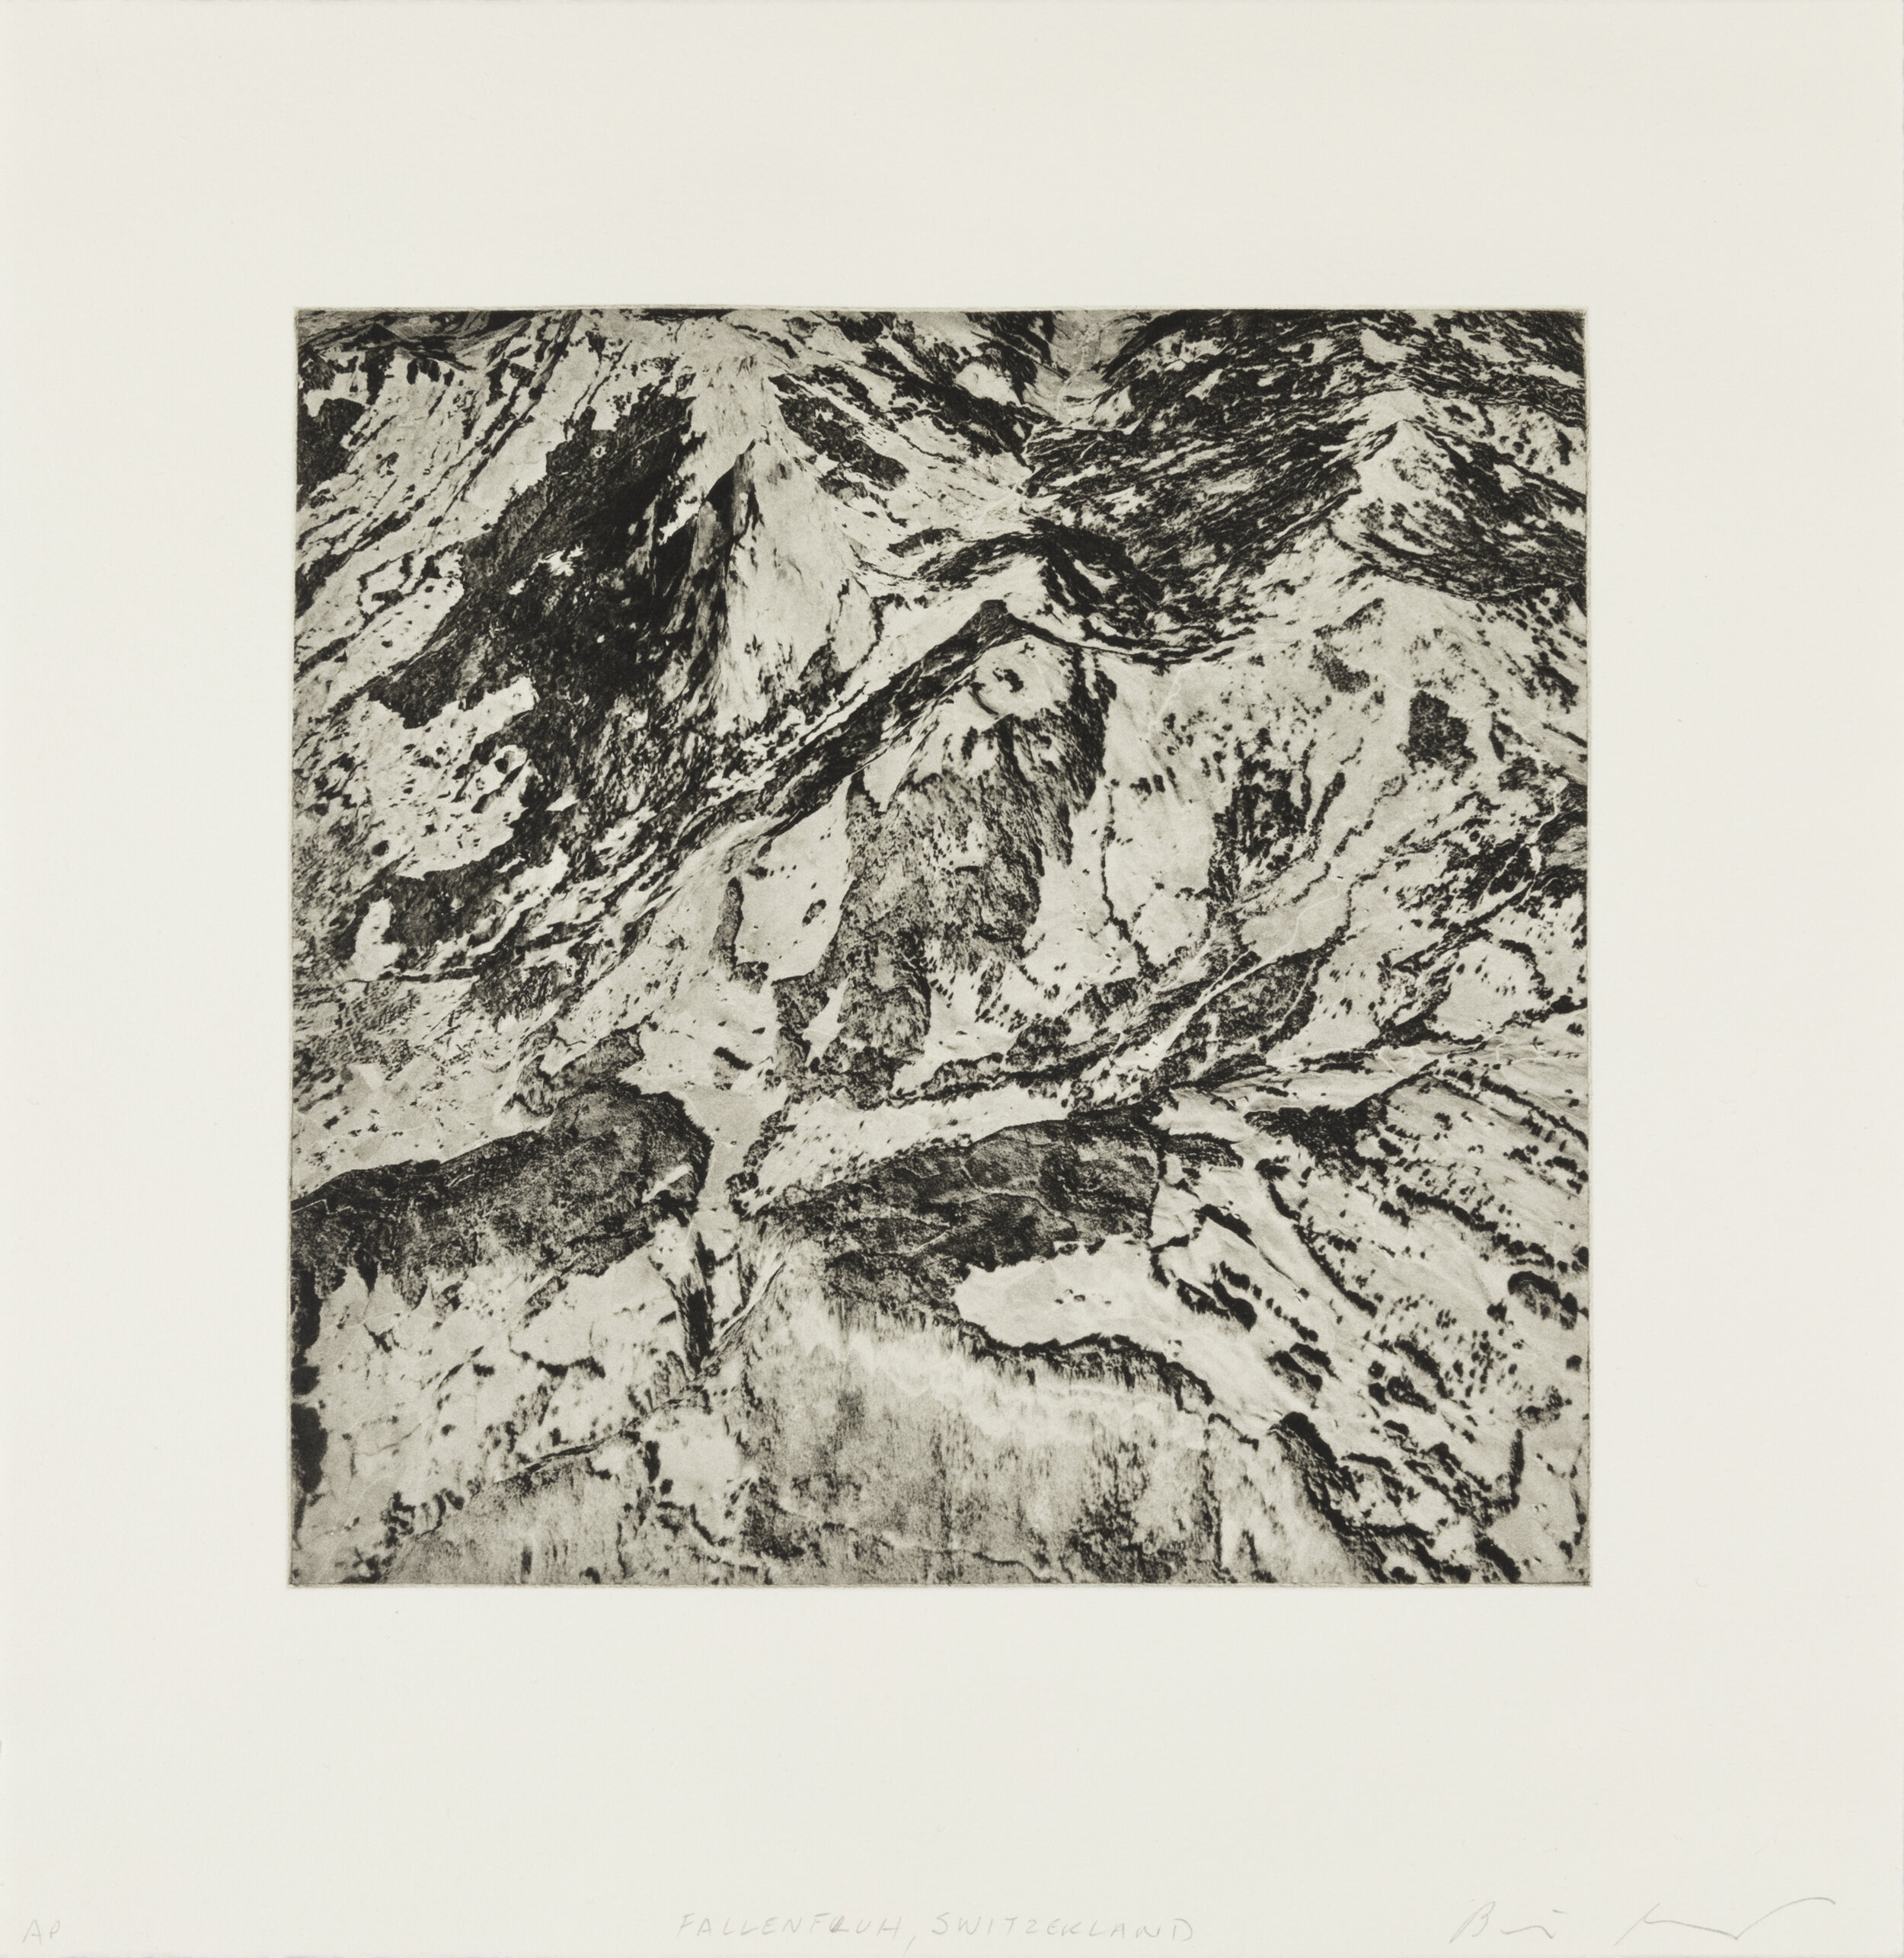    Mount Fallenfluh, Switzerland, 2020   Copperplate photogravure etching on cotton rag paper, plate size; 10.6” x 10.6”, paper size; 16” x 15.5”, edition 10  